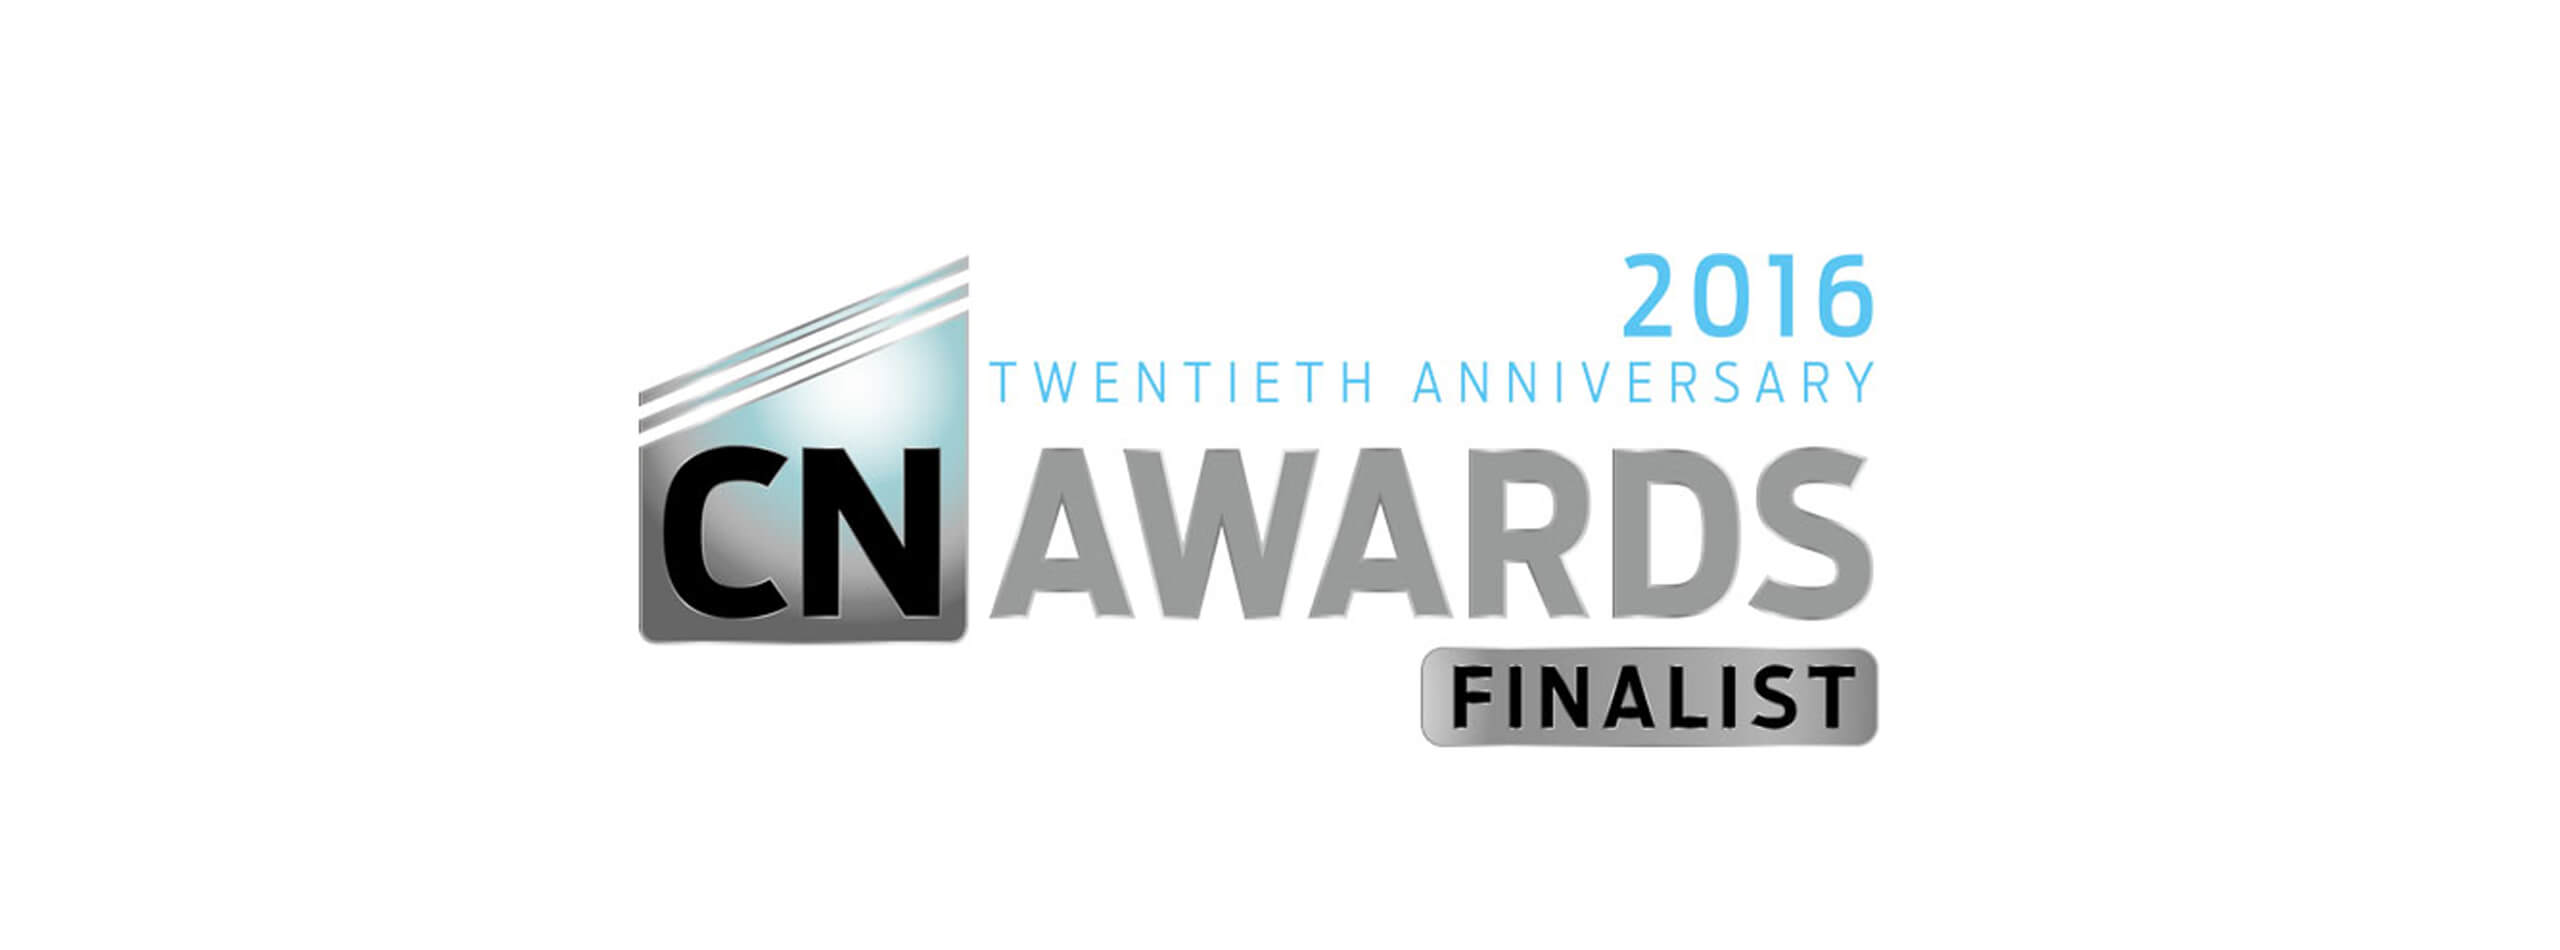 We are pleased to announce that we have been shortlisted as a finalist in the Employer of the Year category of the 2016 Construction News Awards.